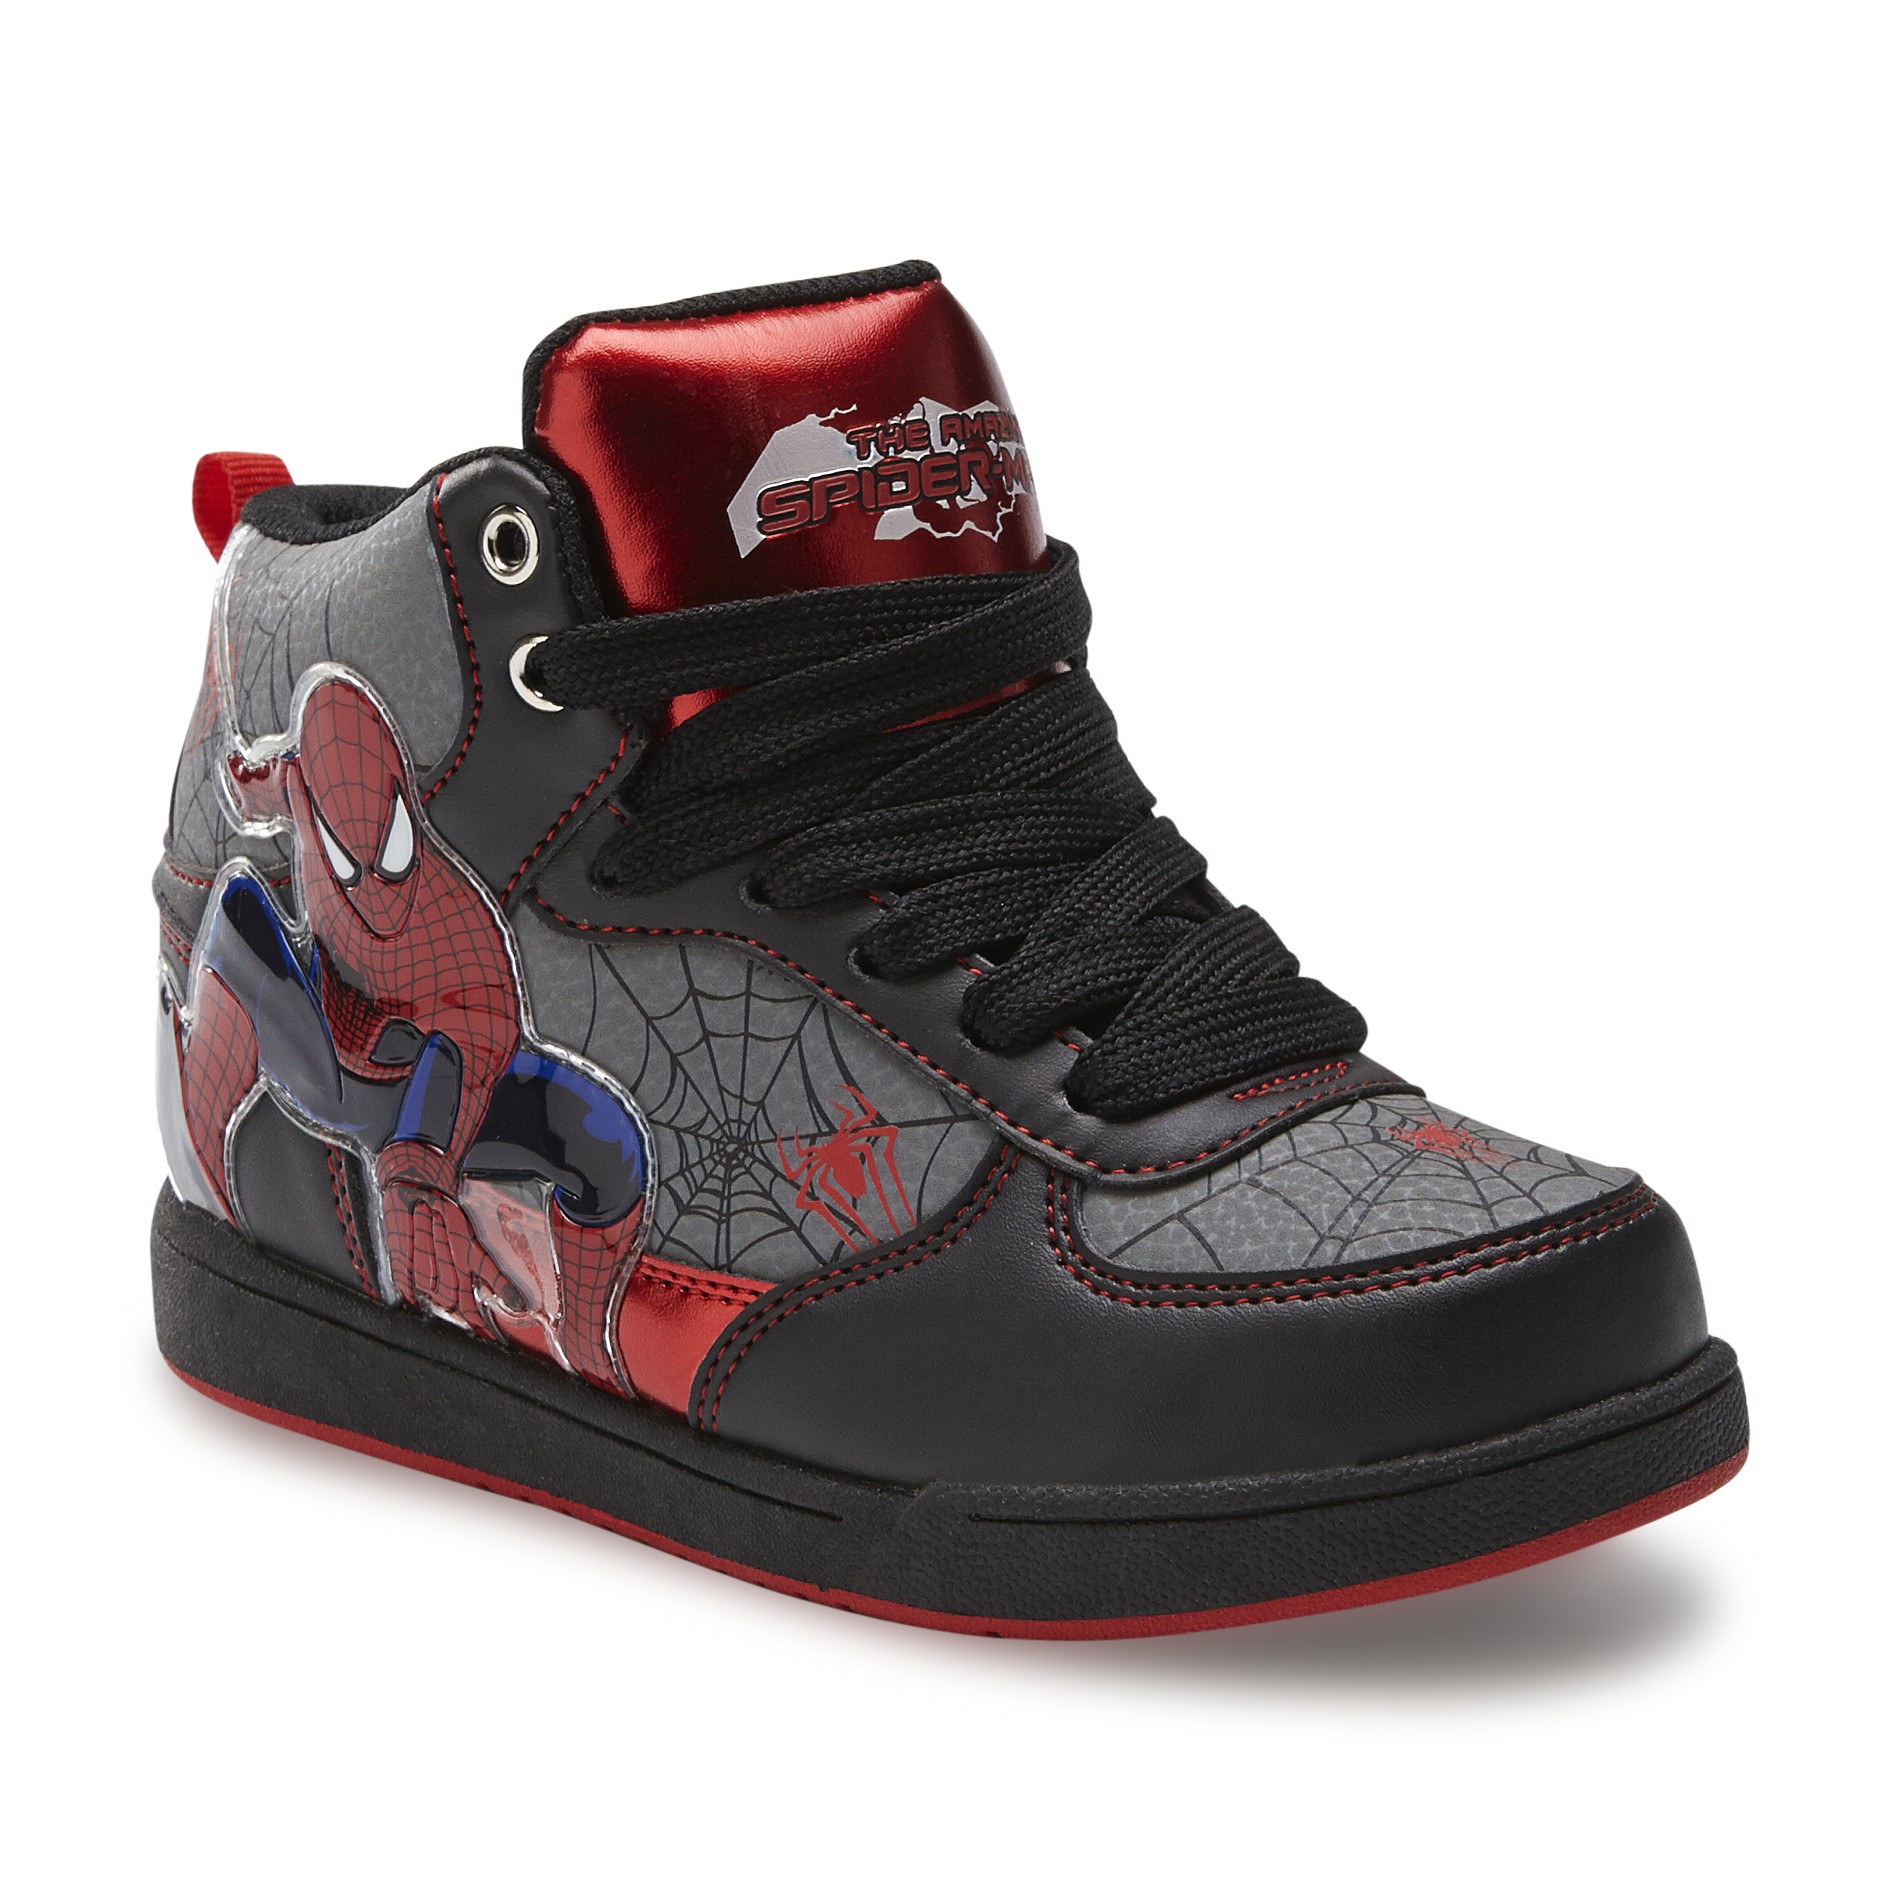 Marvel Boy's Spider-Man High-Top Athletic Shoe - Blue/Red